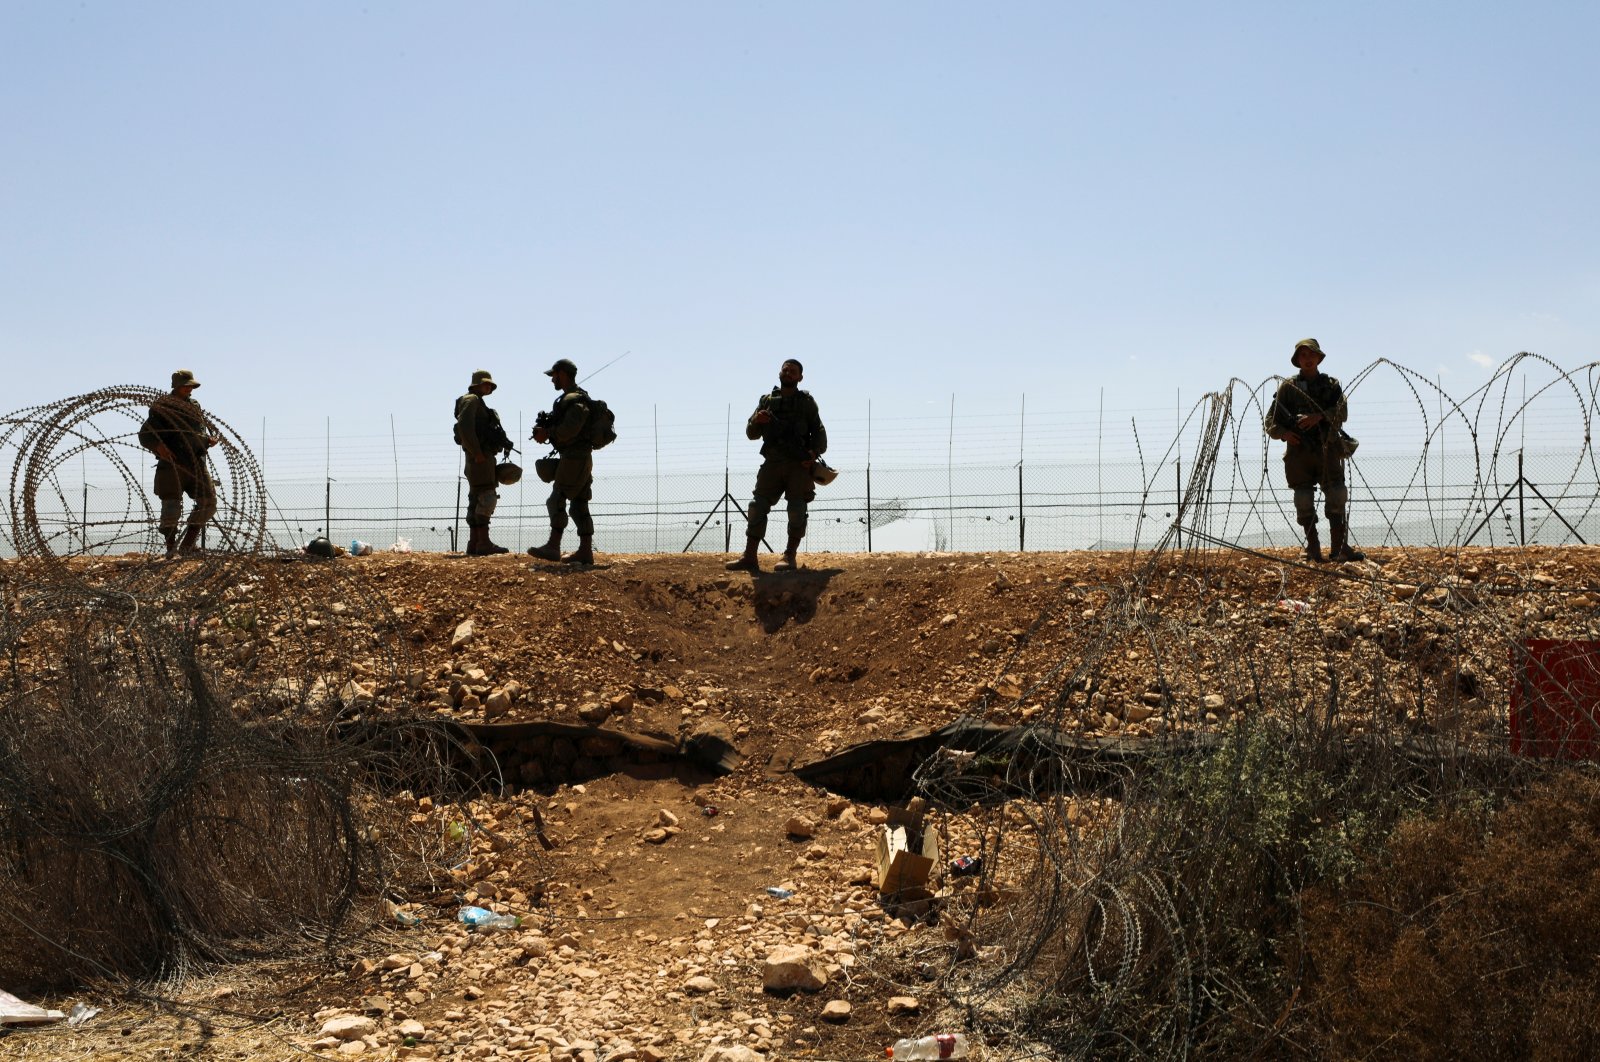 Israeli soldiers guard a fence leading to the Israeli-occupied West Bank, as part of search efforts to capture six Palestinian men who had escaped from Gilboa prison earlier this week, by the village of Muqeibila in northern Israel, Sept. 9, 2021. (Reuters Photo)